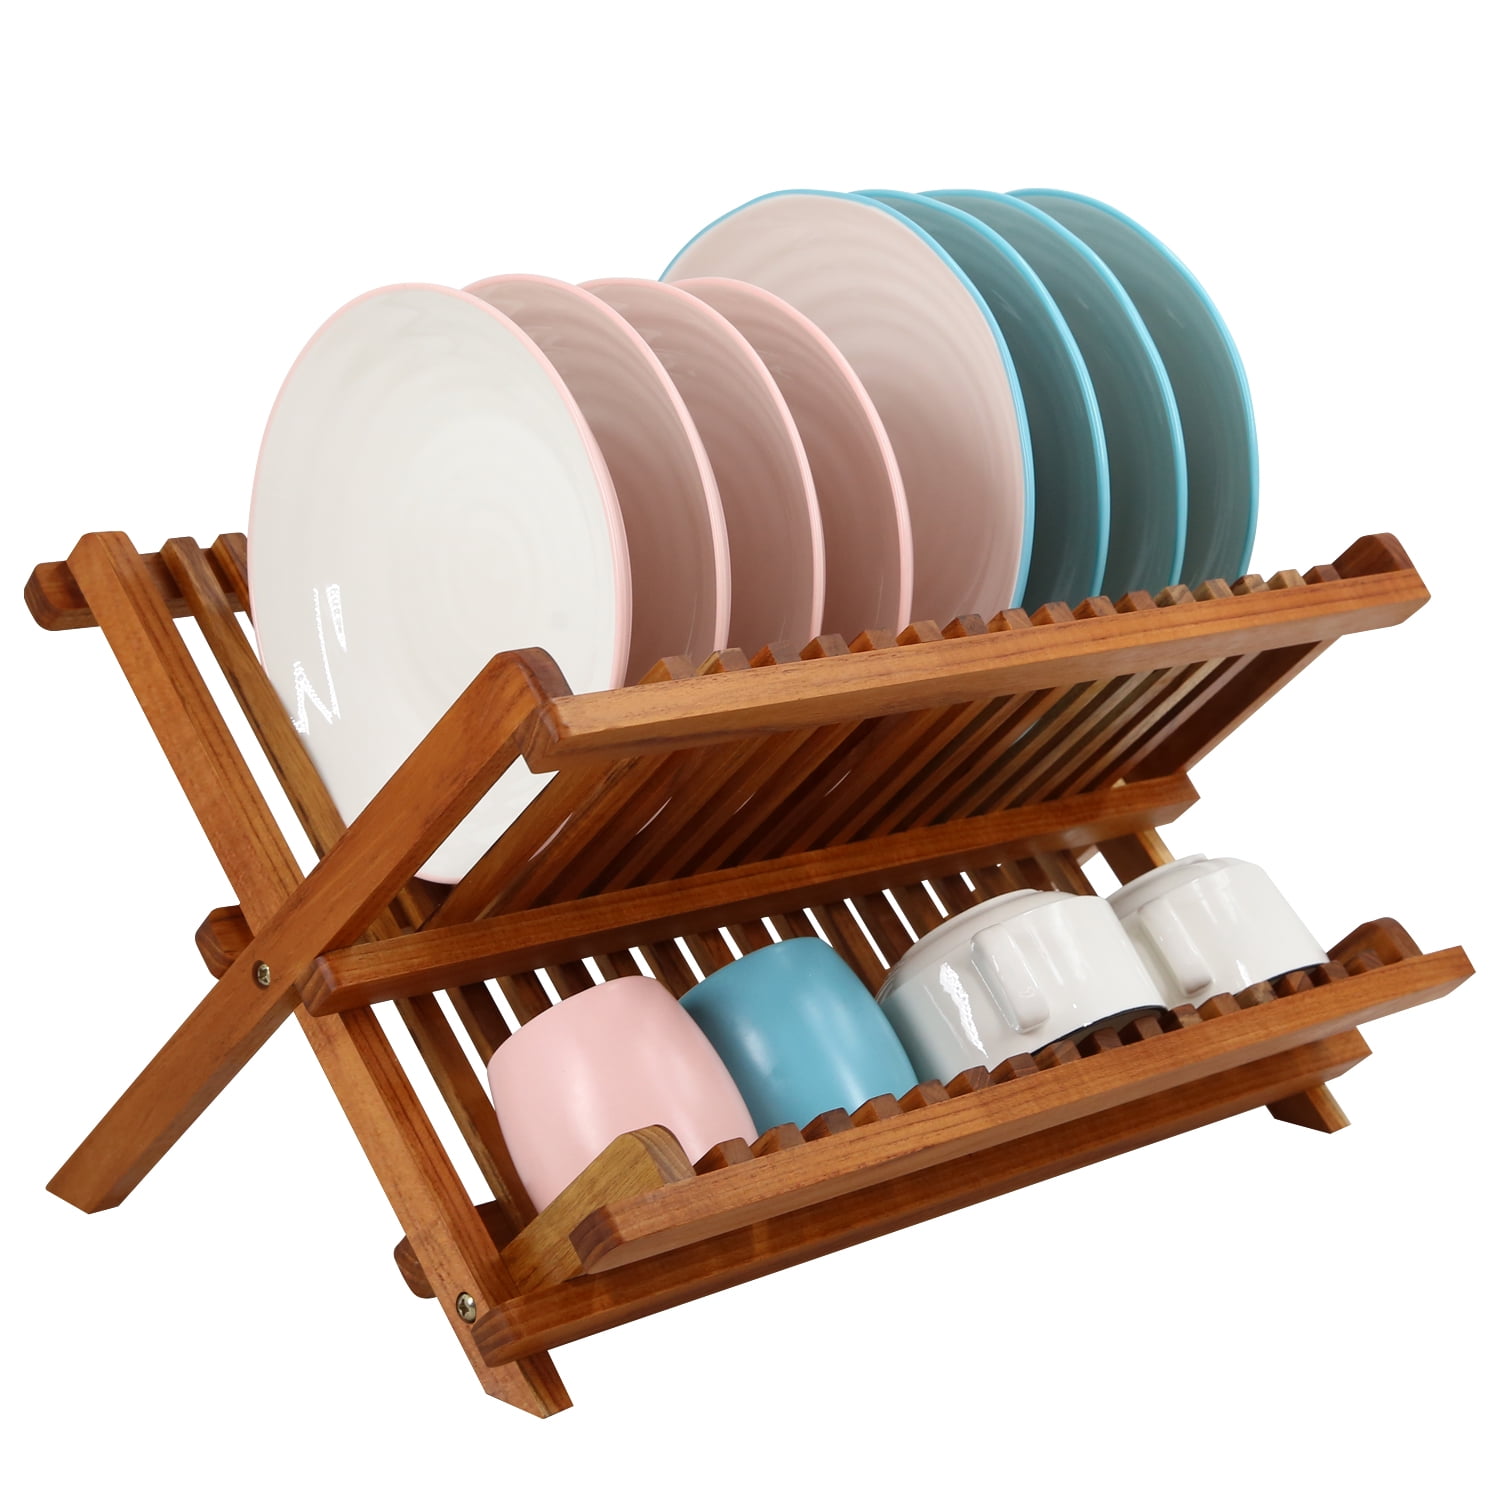 Details about   Kitchen Wooden Plate Rack Wood Dish Drainer Vertical Dish Drying Stand Shelf  US 